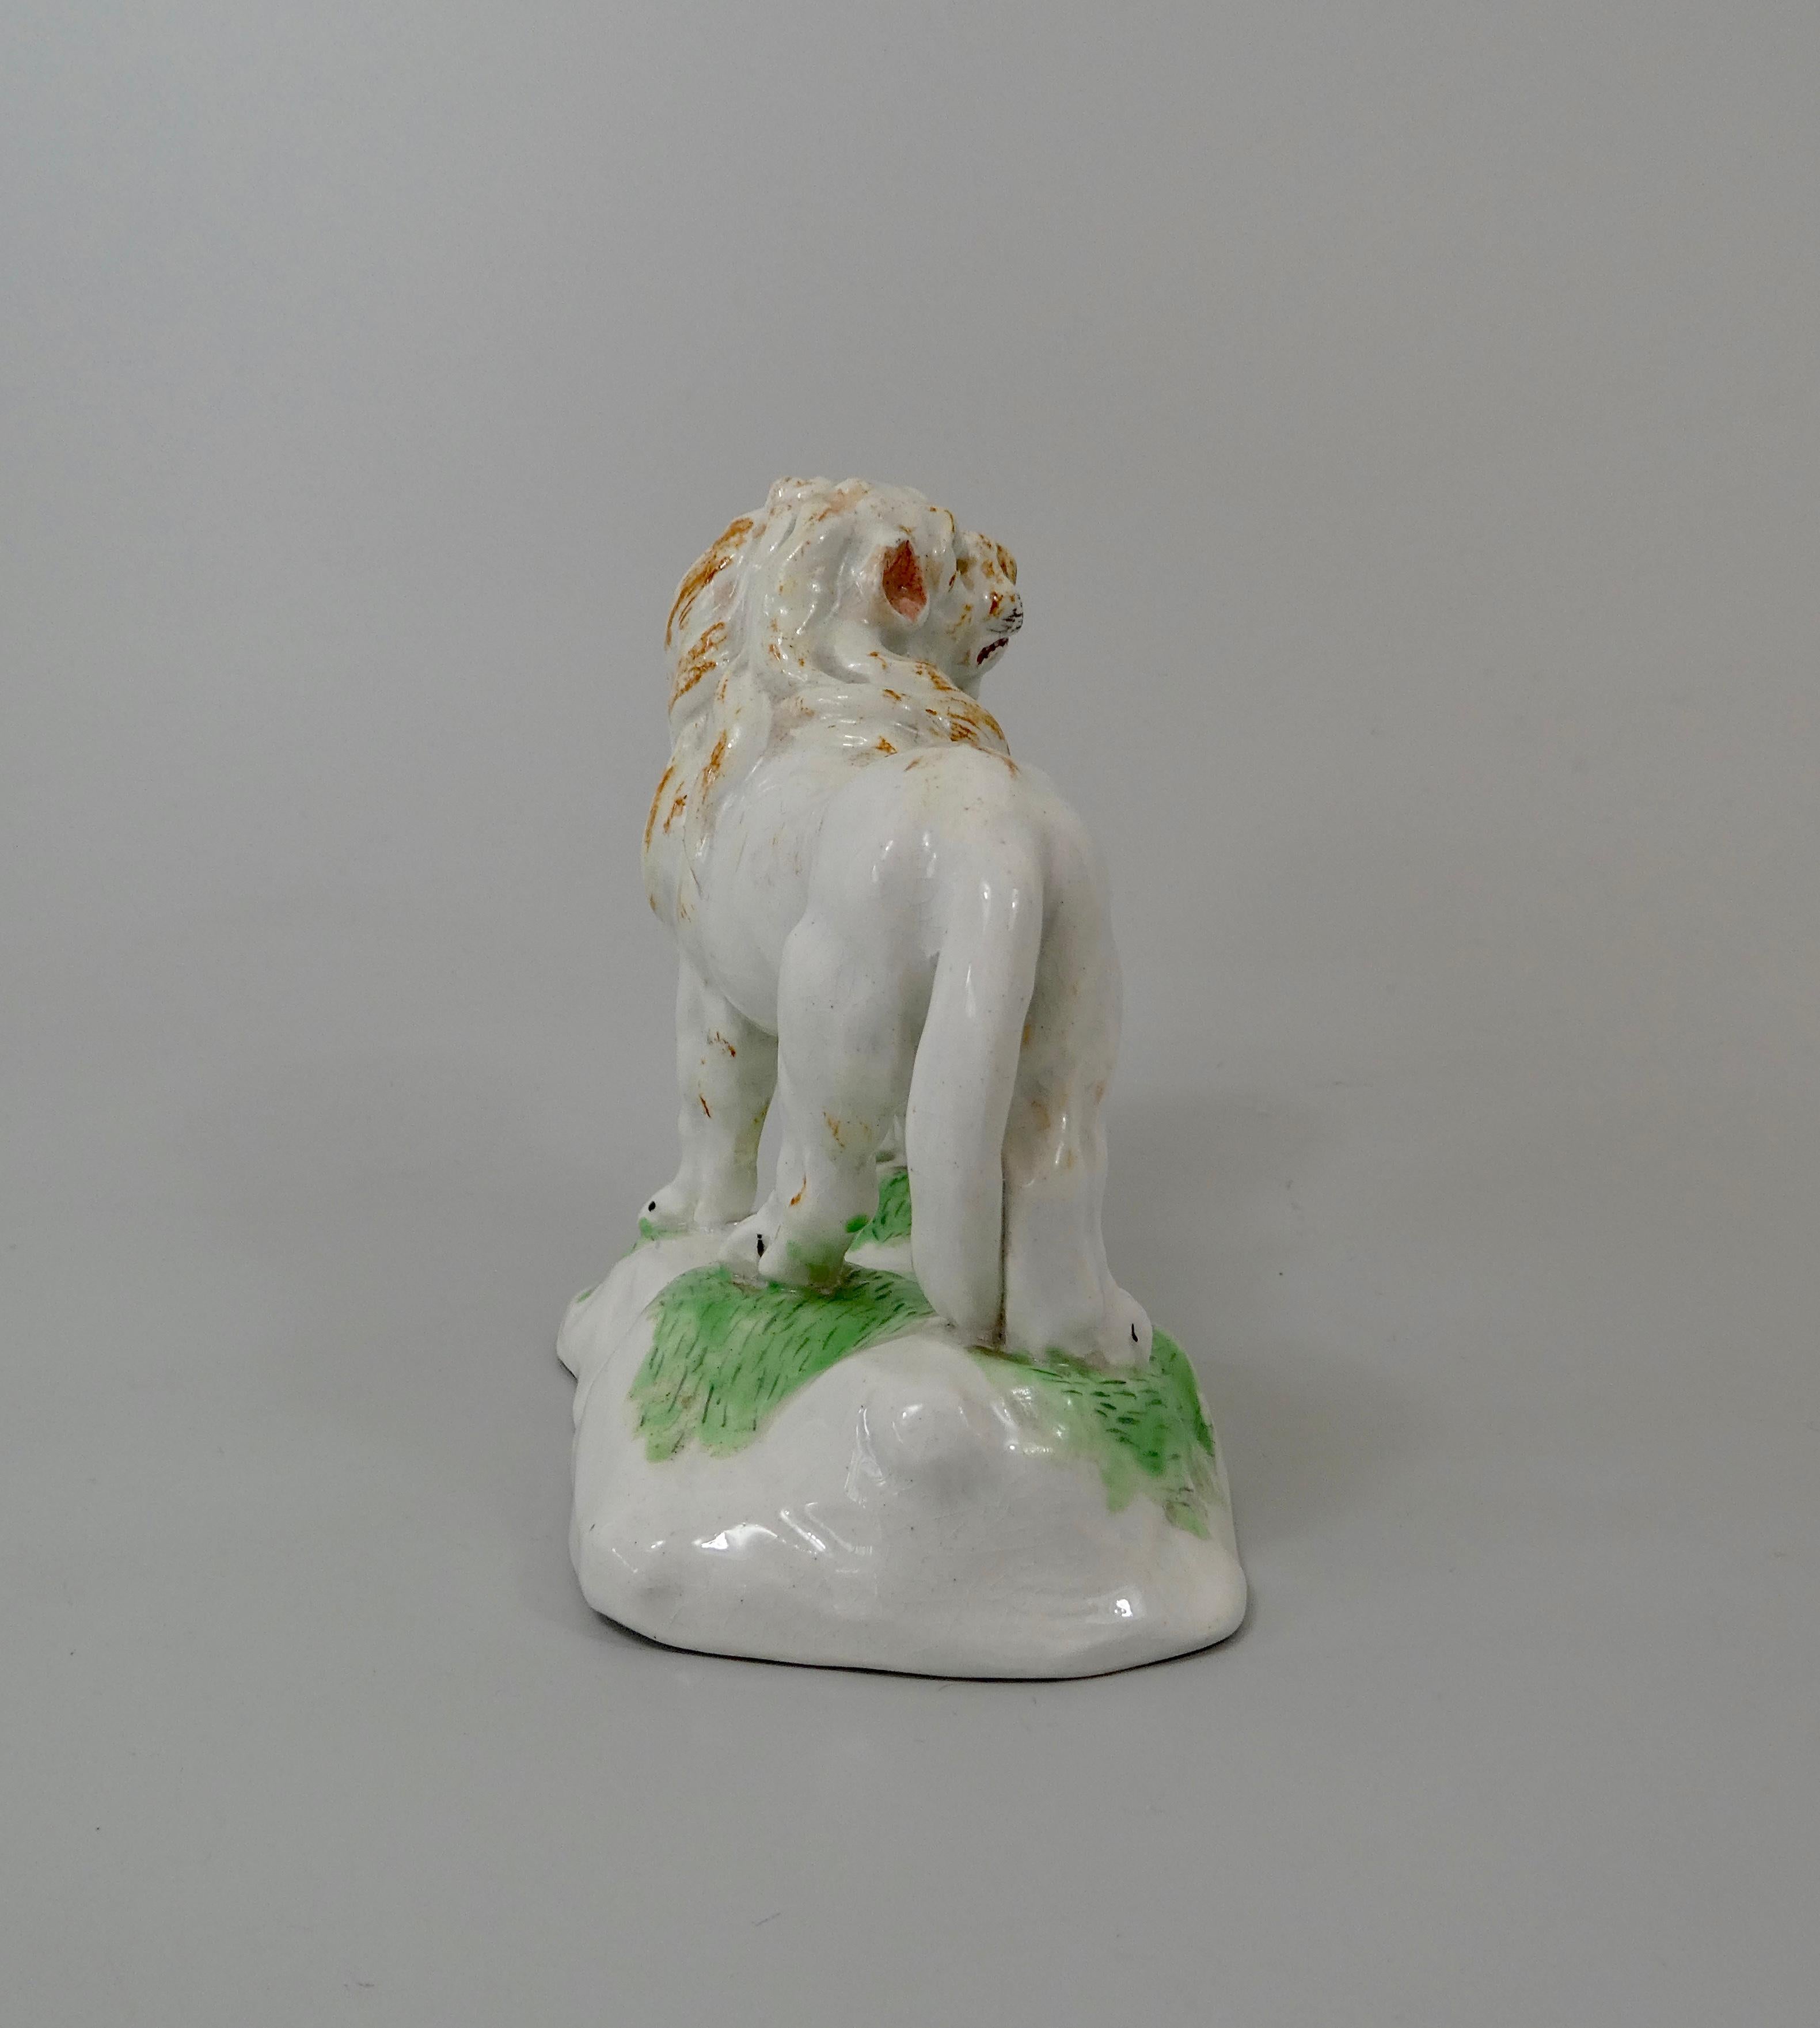 Fired Rare Niderviller Faience Figure of a Lion, circa 1780, Count Custine Period